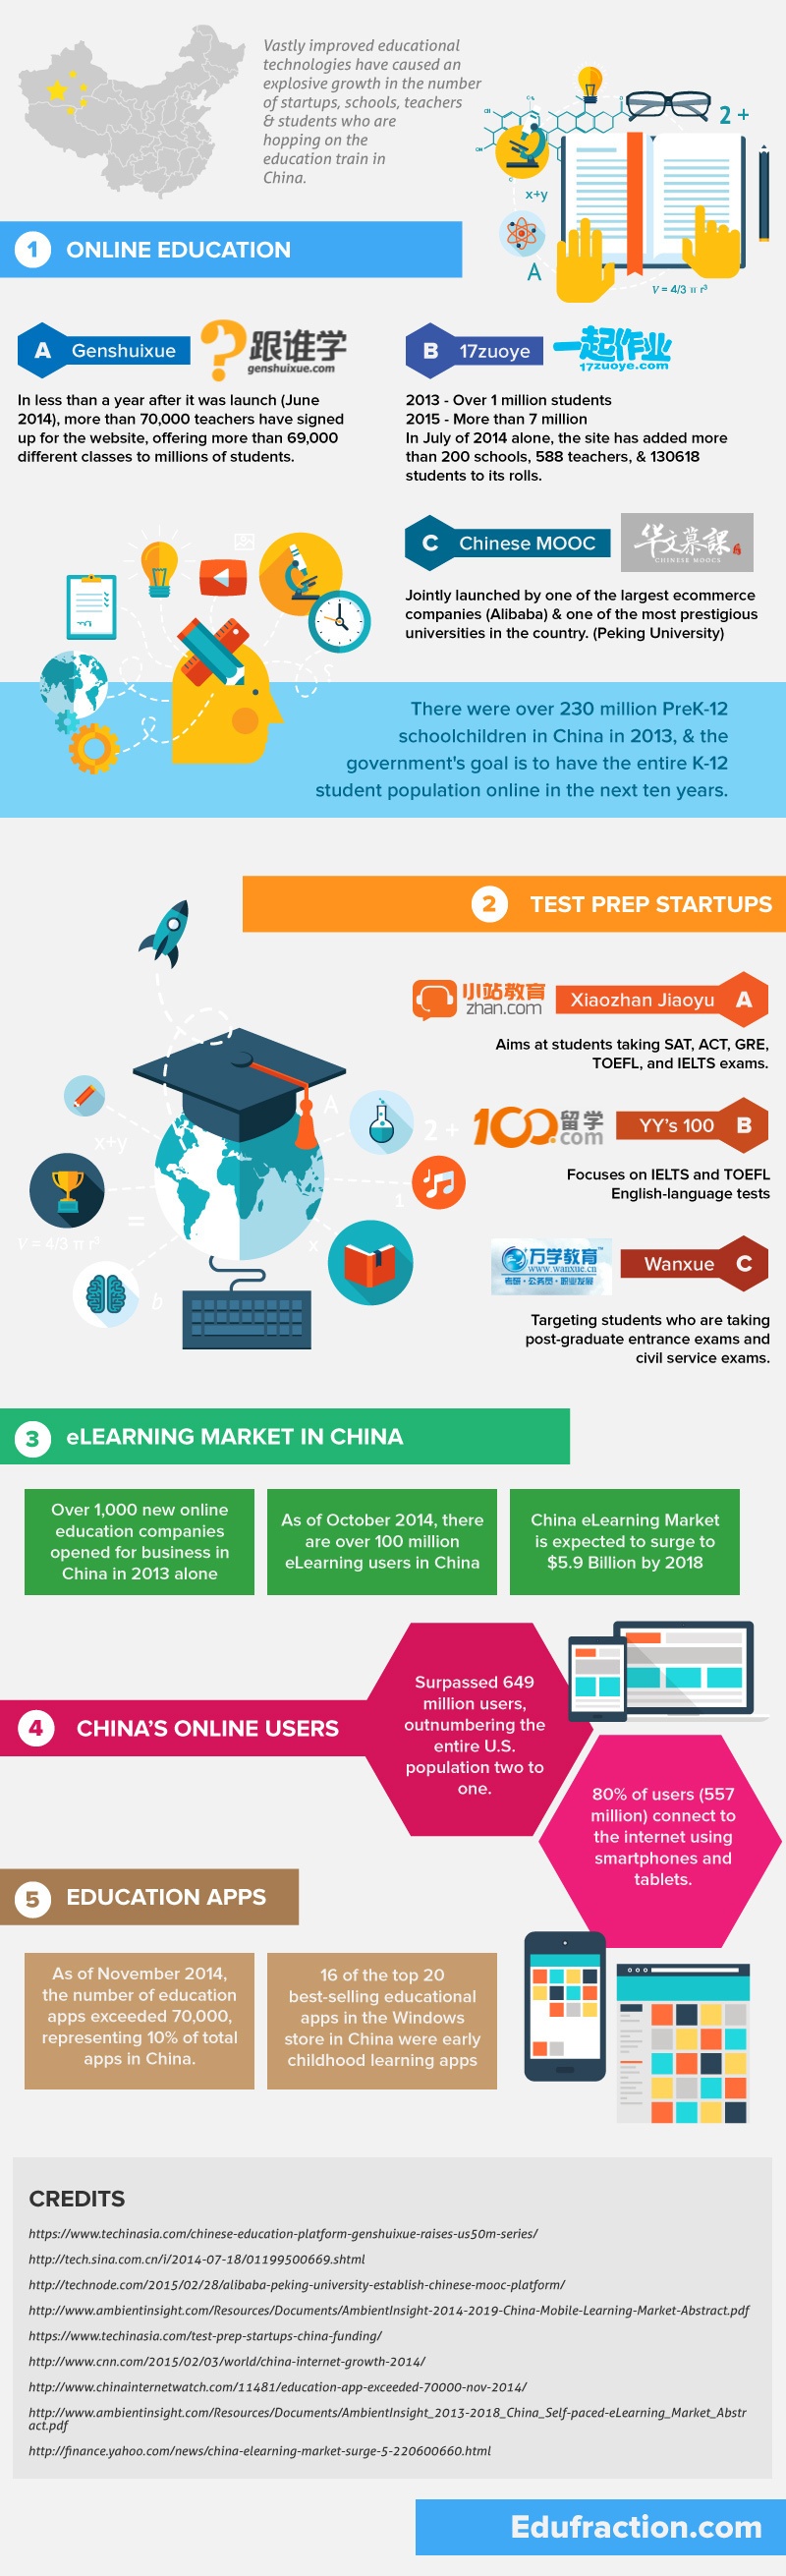 China’s Online Education and eLearning Market Infographic